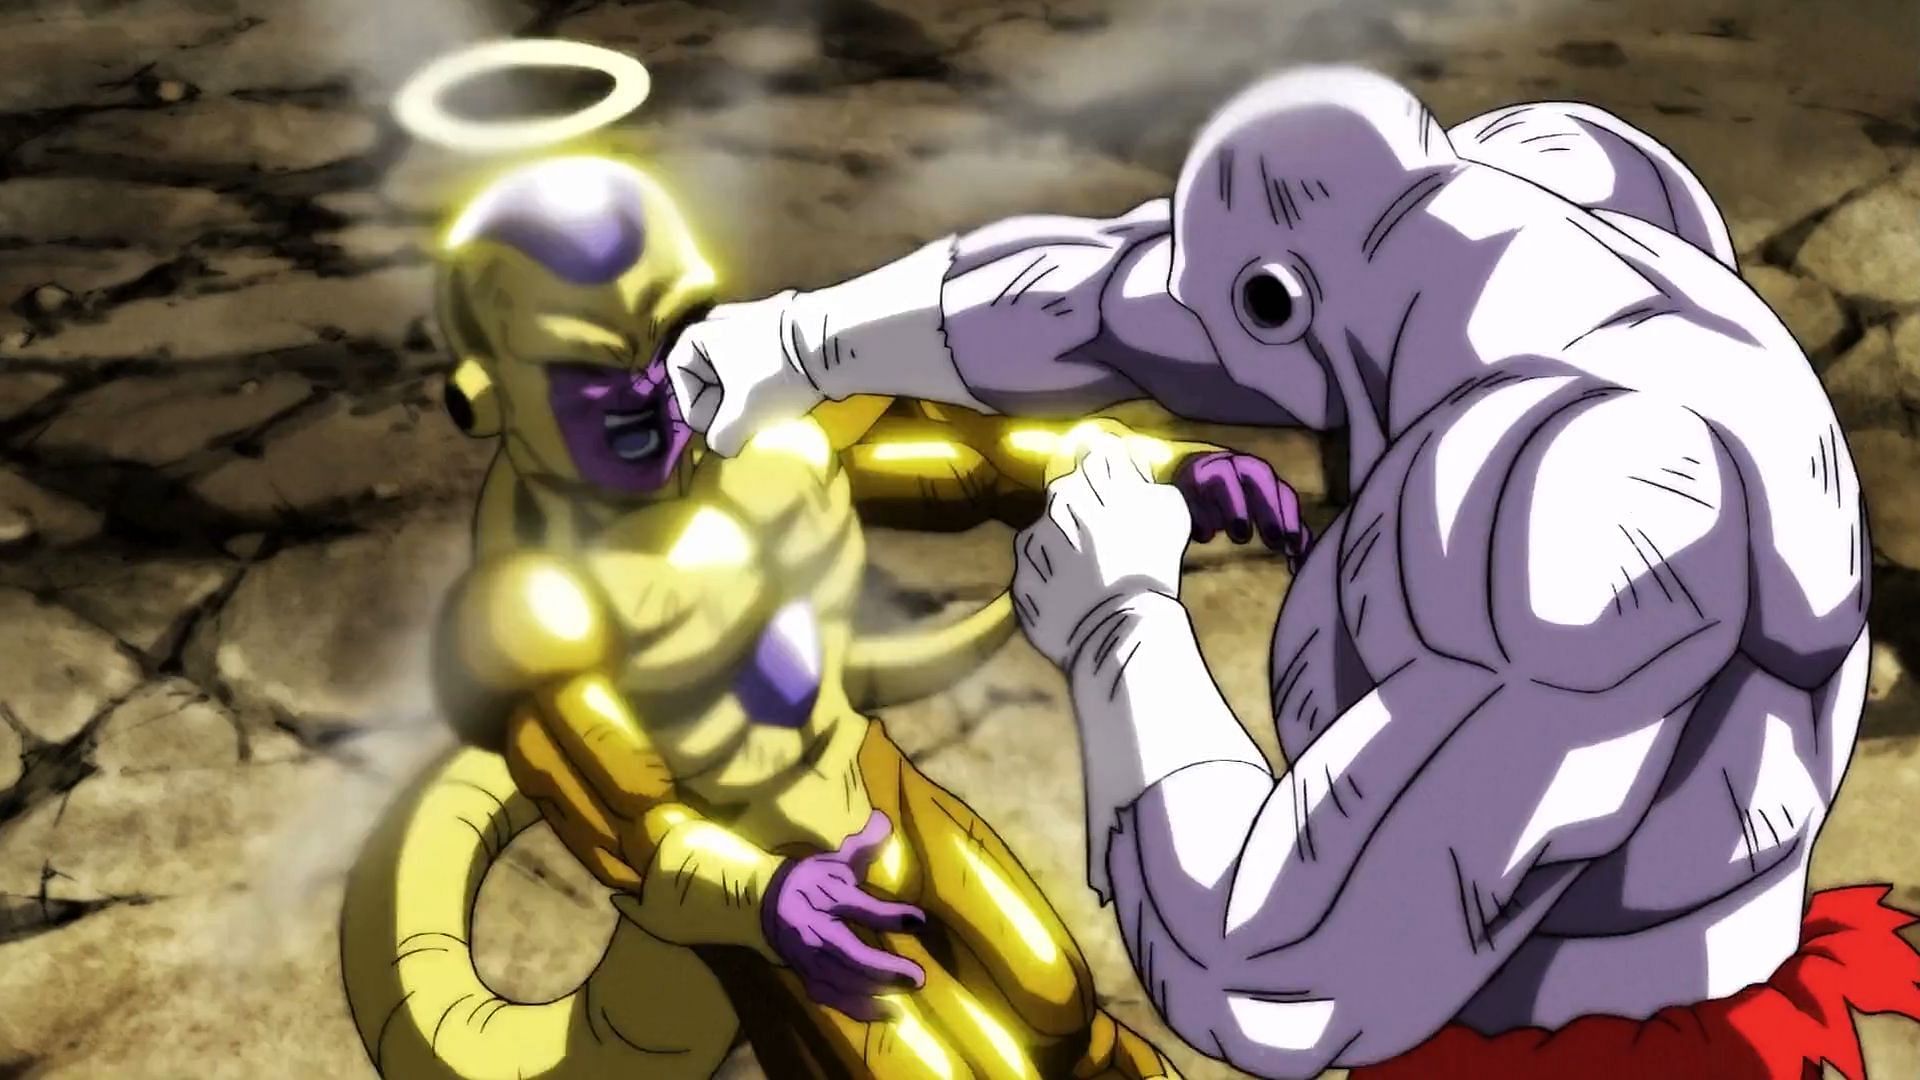 Jiren destroyed Frieza in the past (Image via Toei Animation